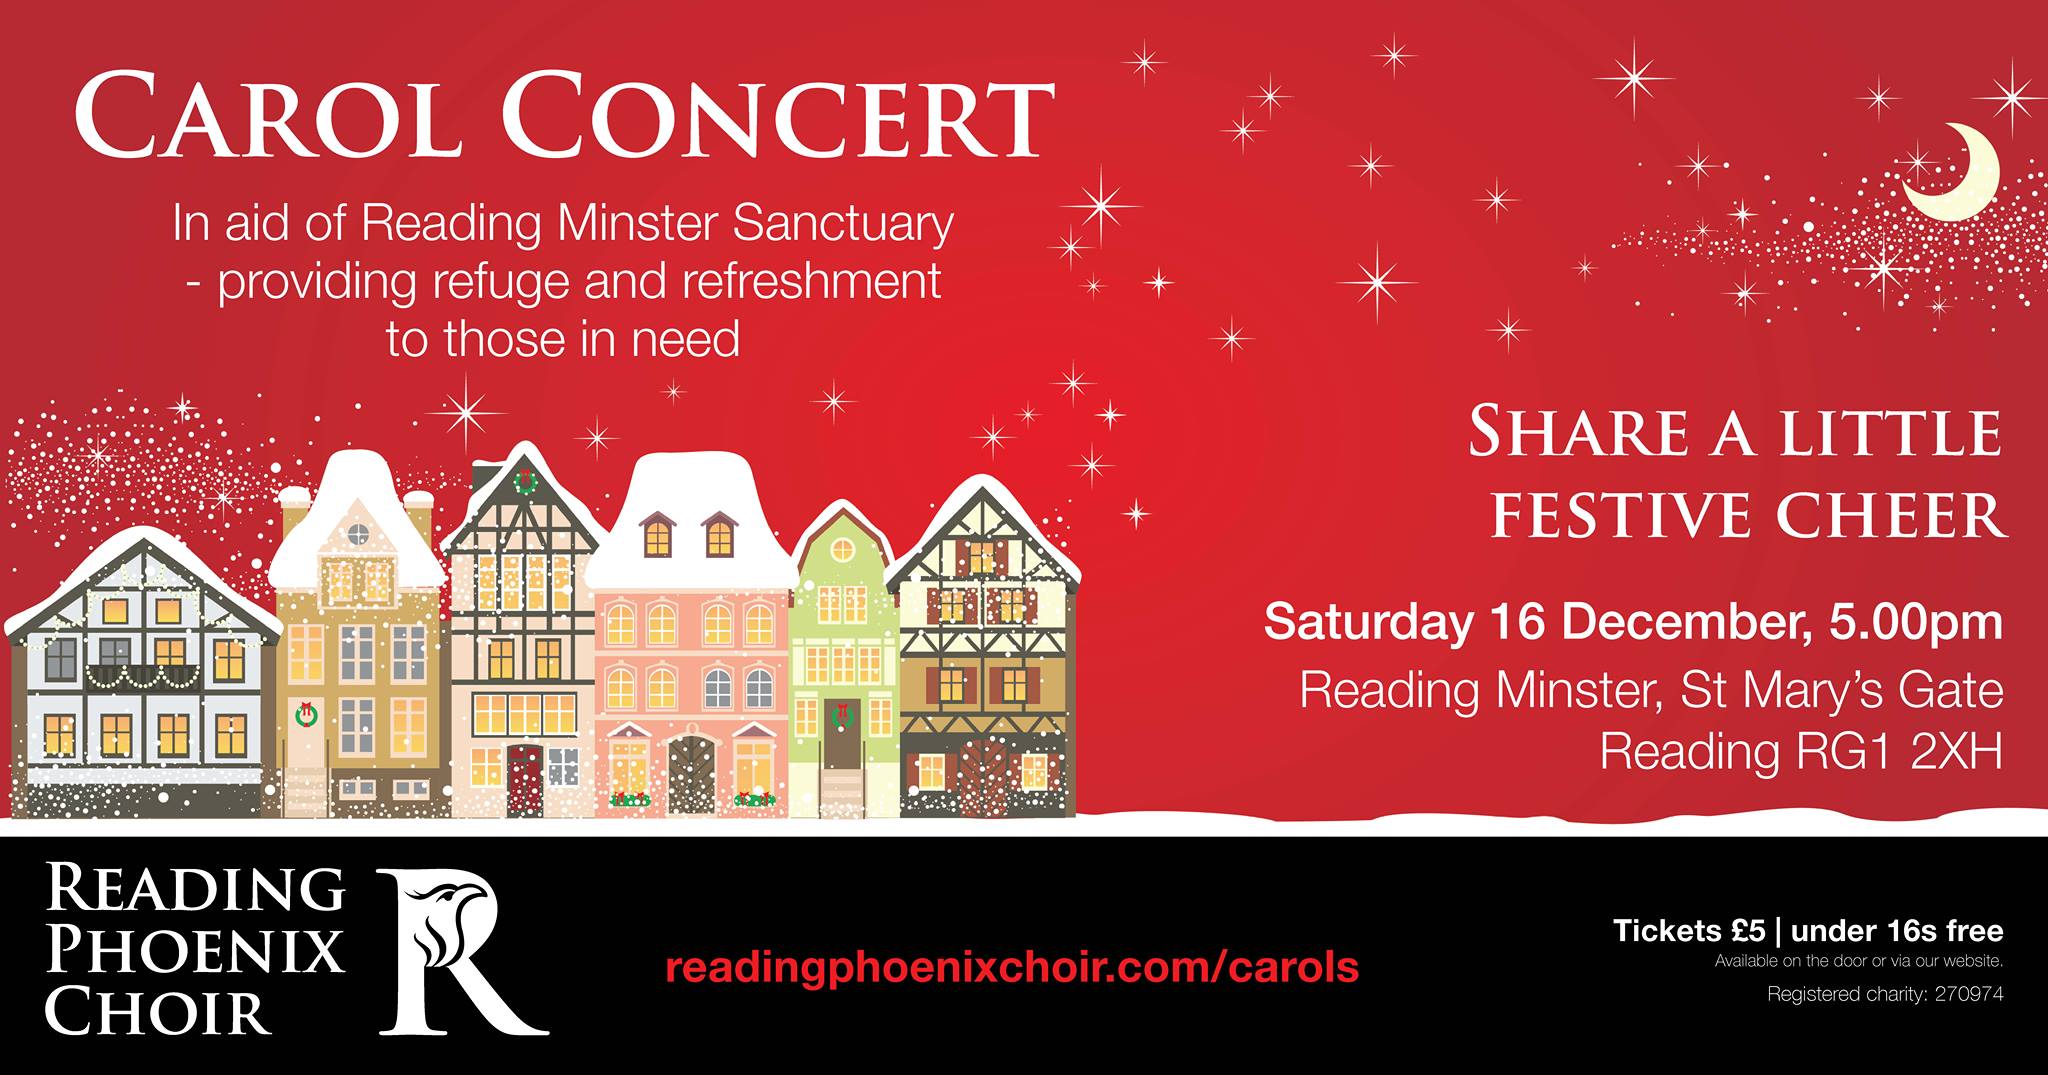 Reading Phoenix Choir offers sanctuary at Reading Minster this Christmas time